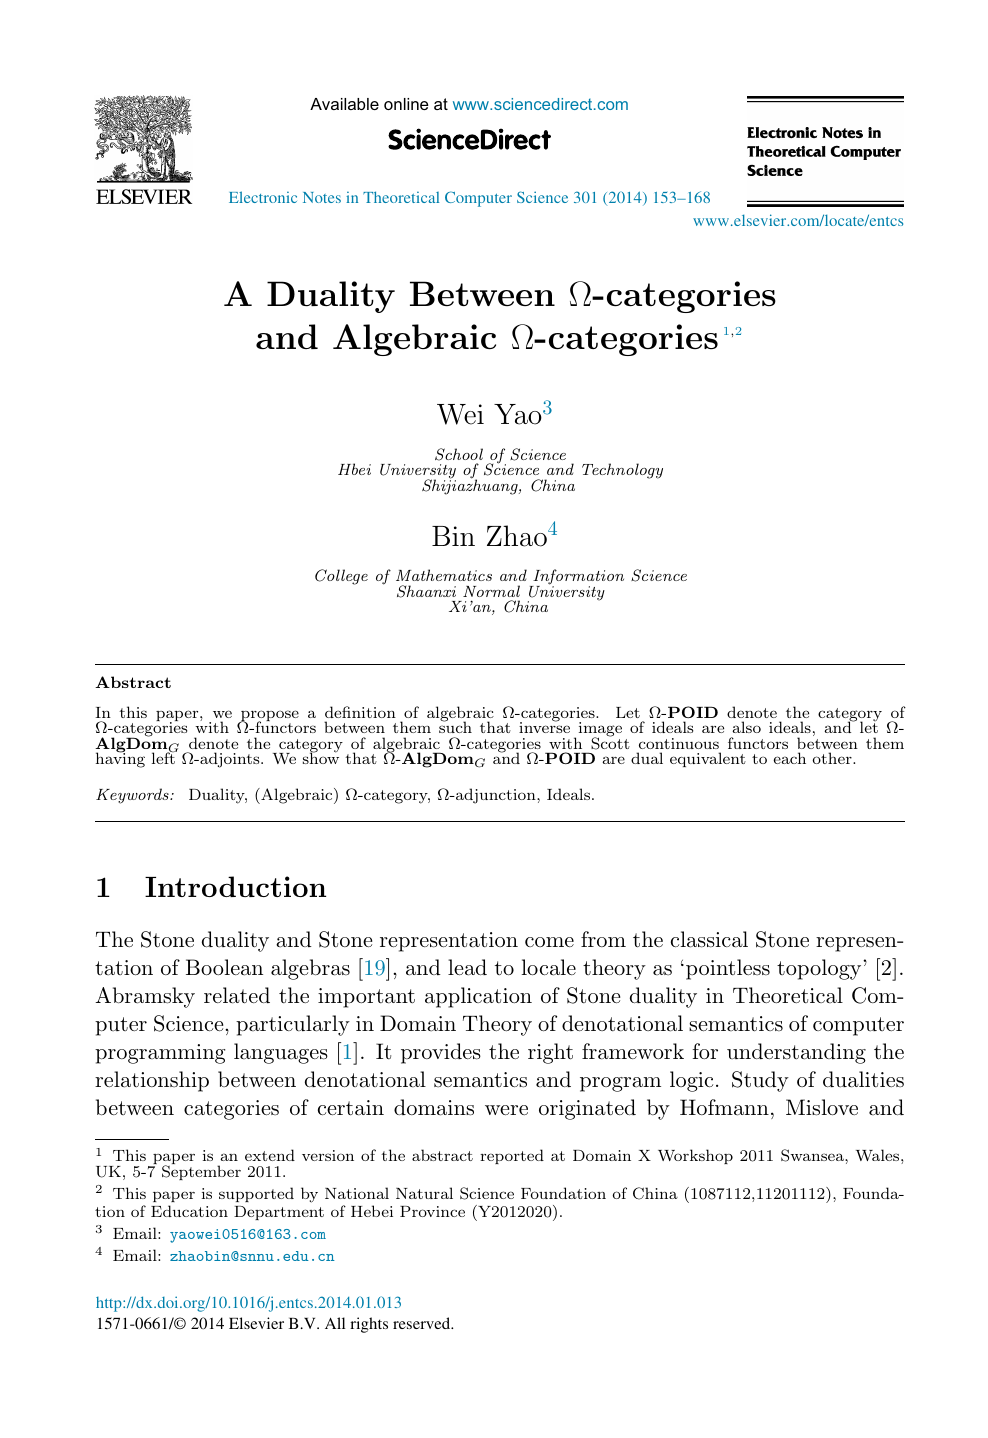 A Duality Between ω Categories And Algebraic ω Categories - 